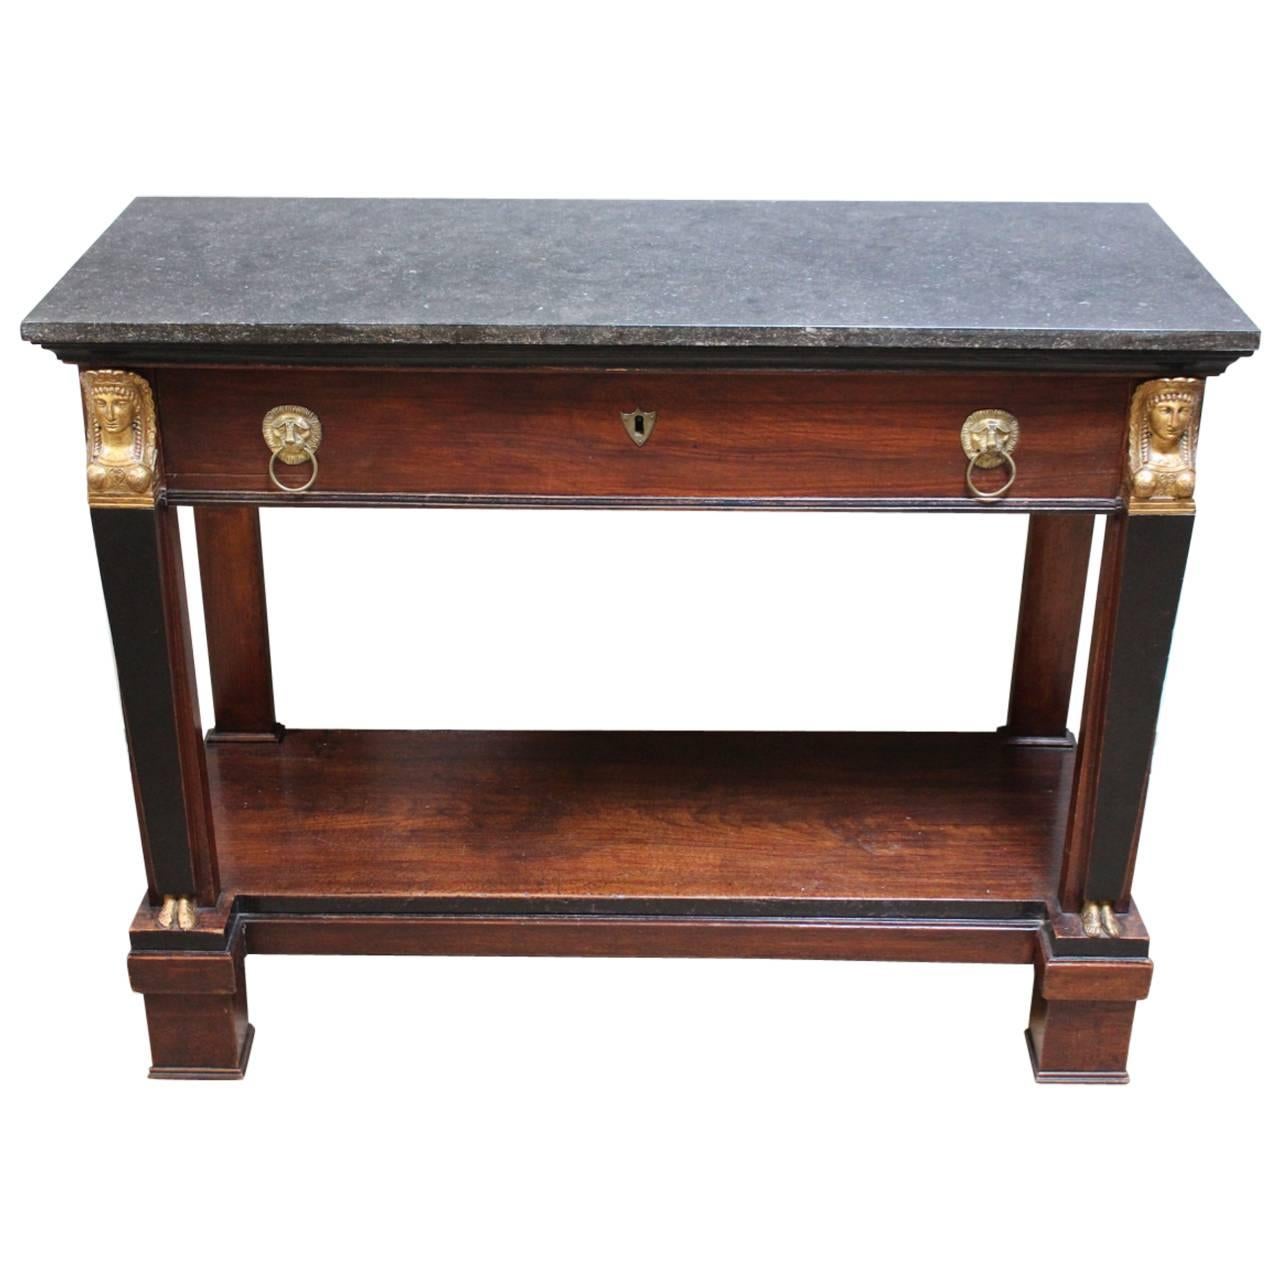 Early 19th Century French Egyptian Revival Console